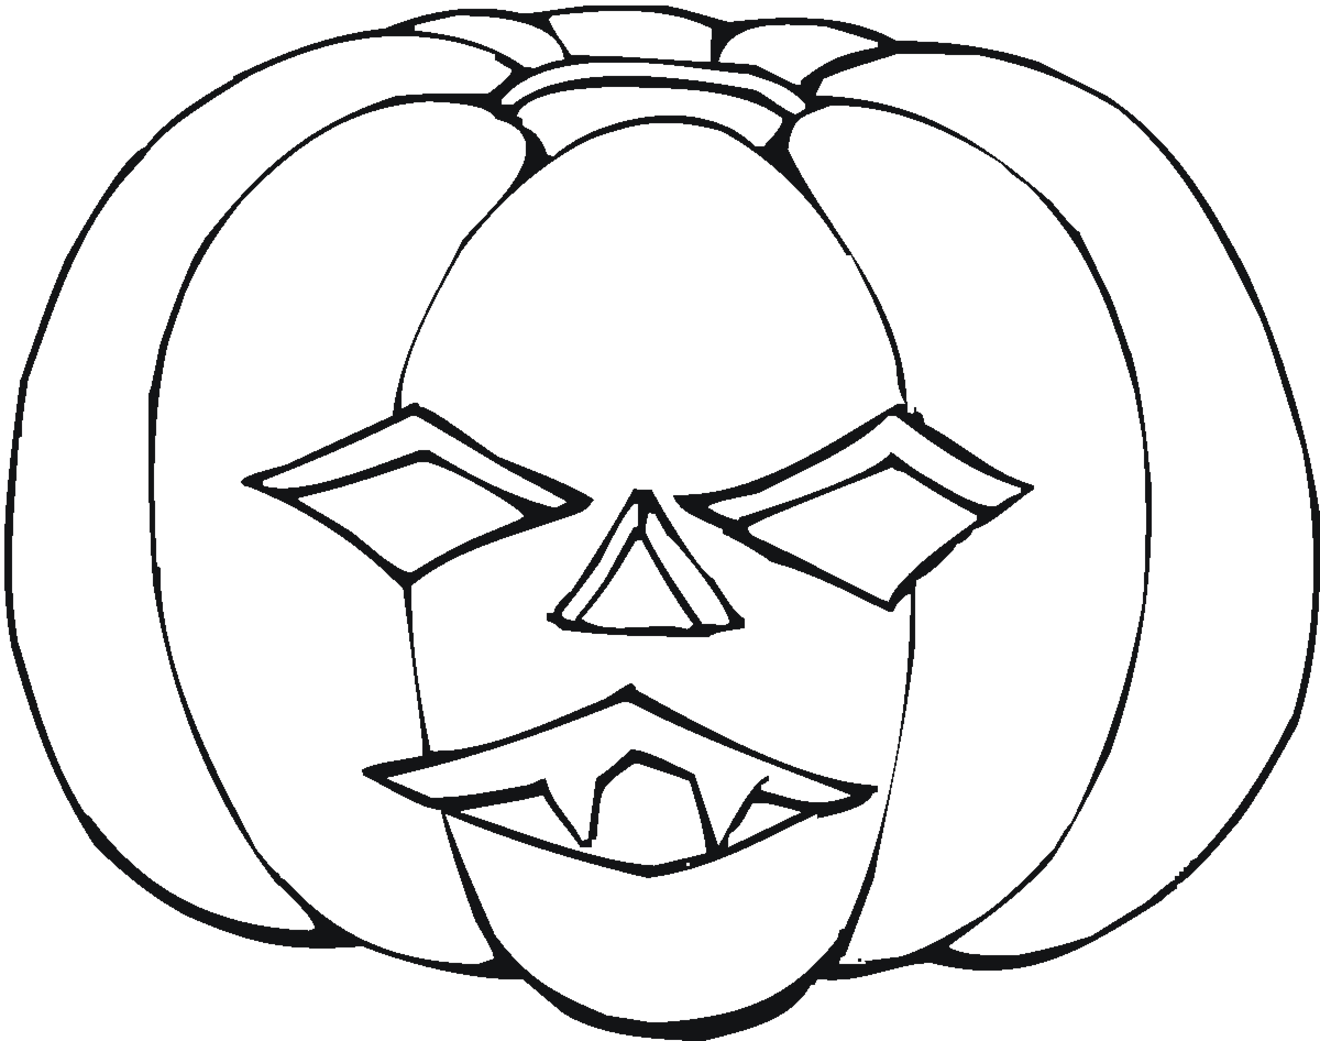 Coloring page: Pumpkin (Objects) #166858 - Free Printable Coloring Pages